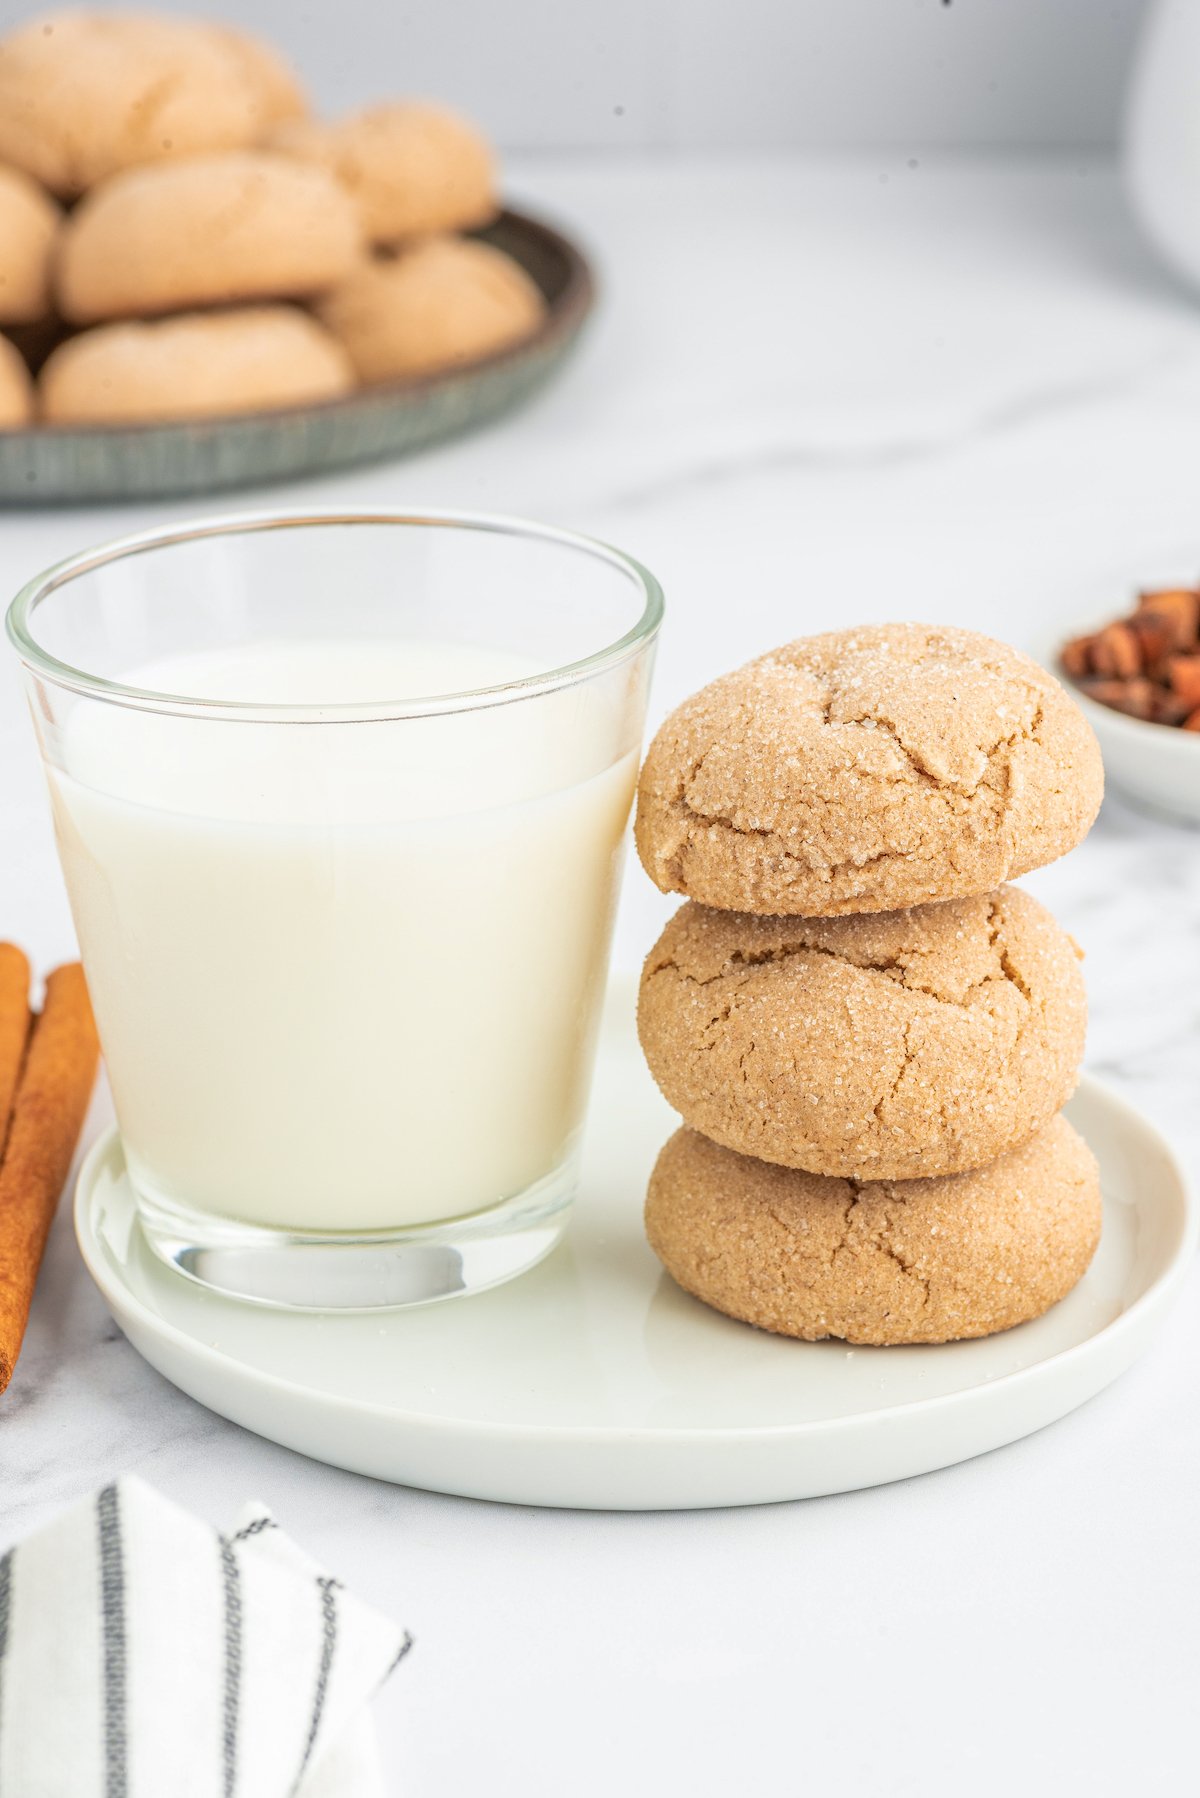 Three cookies balanced on top of each other, next to a glass of milk.